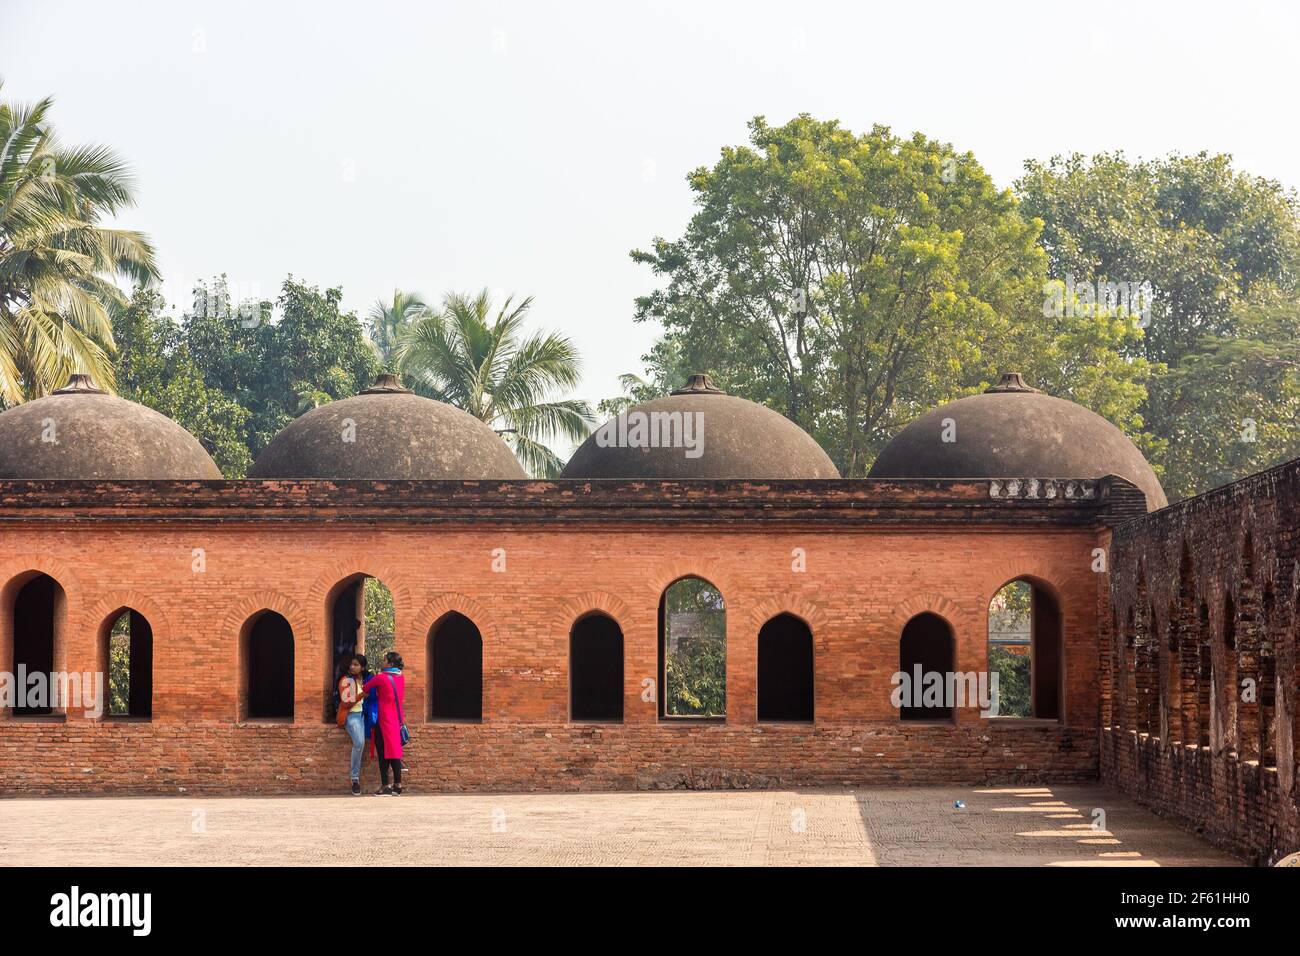 Murshidabad, West Bengal, India - January 2018: A domed  arcade in the ruins of the ancient Katra Masjid mosque in the town of Murshidabad. Stock Photo